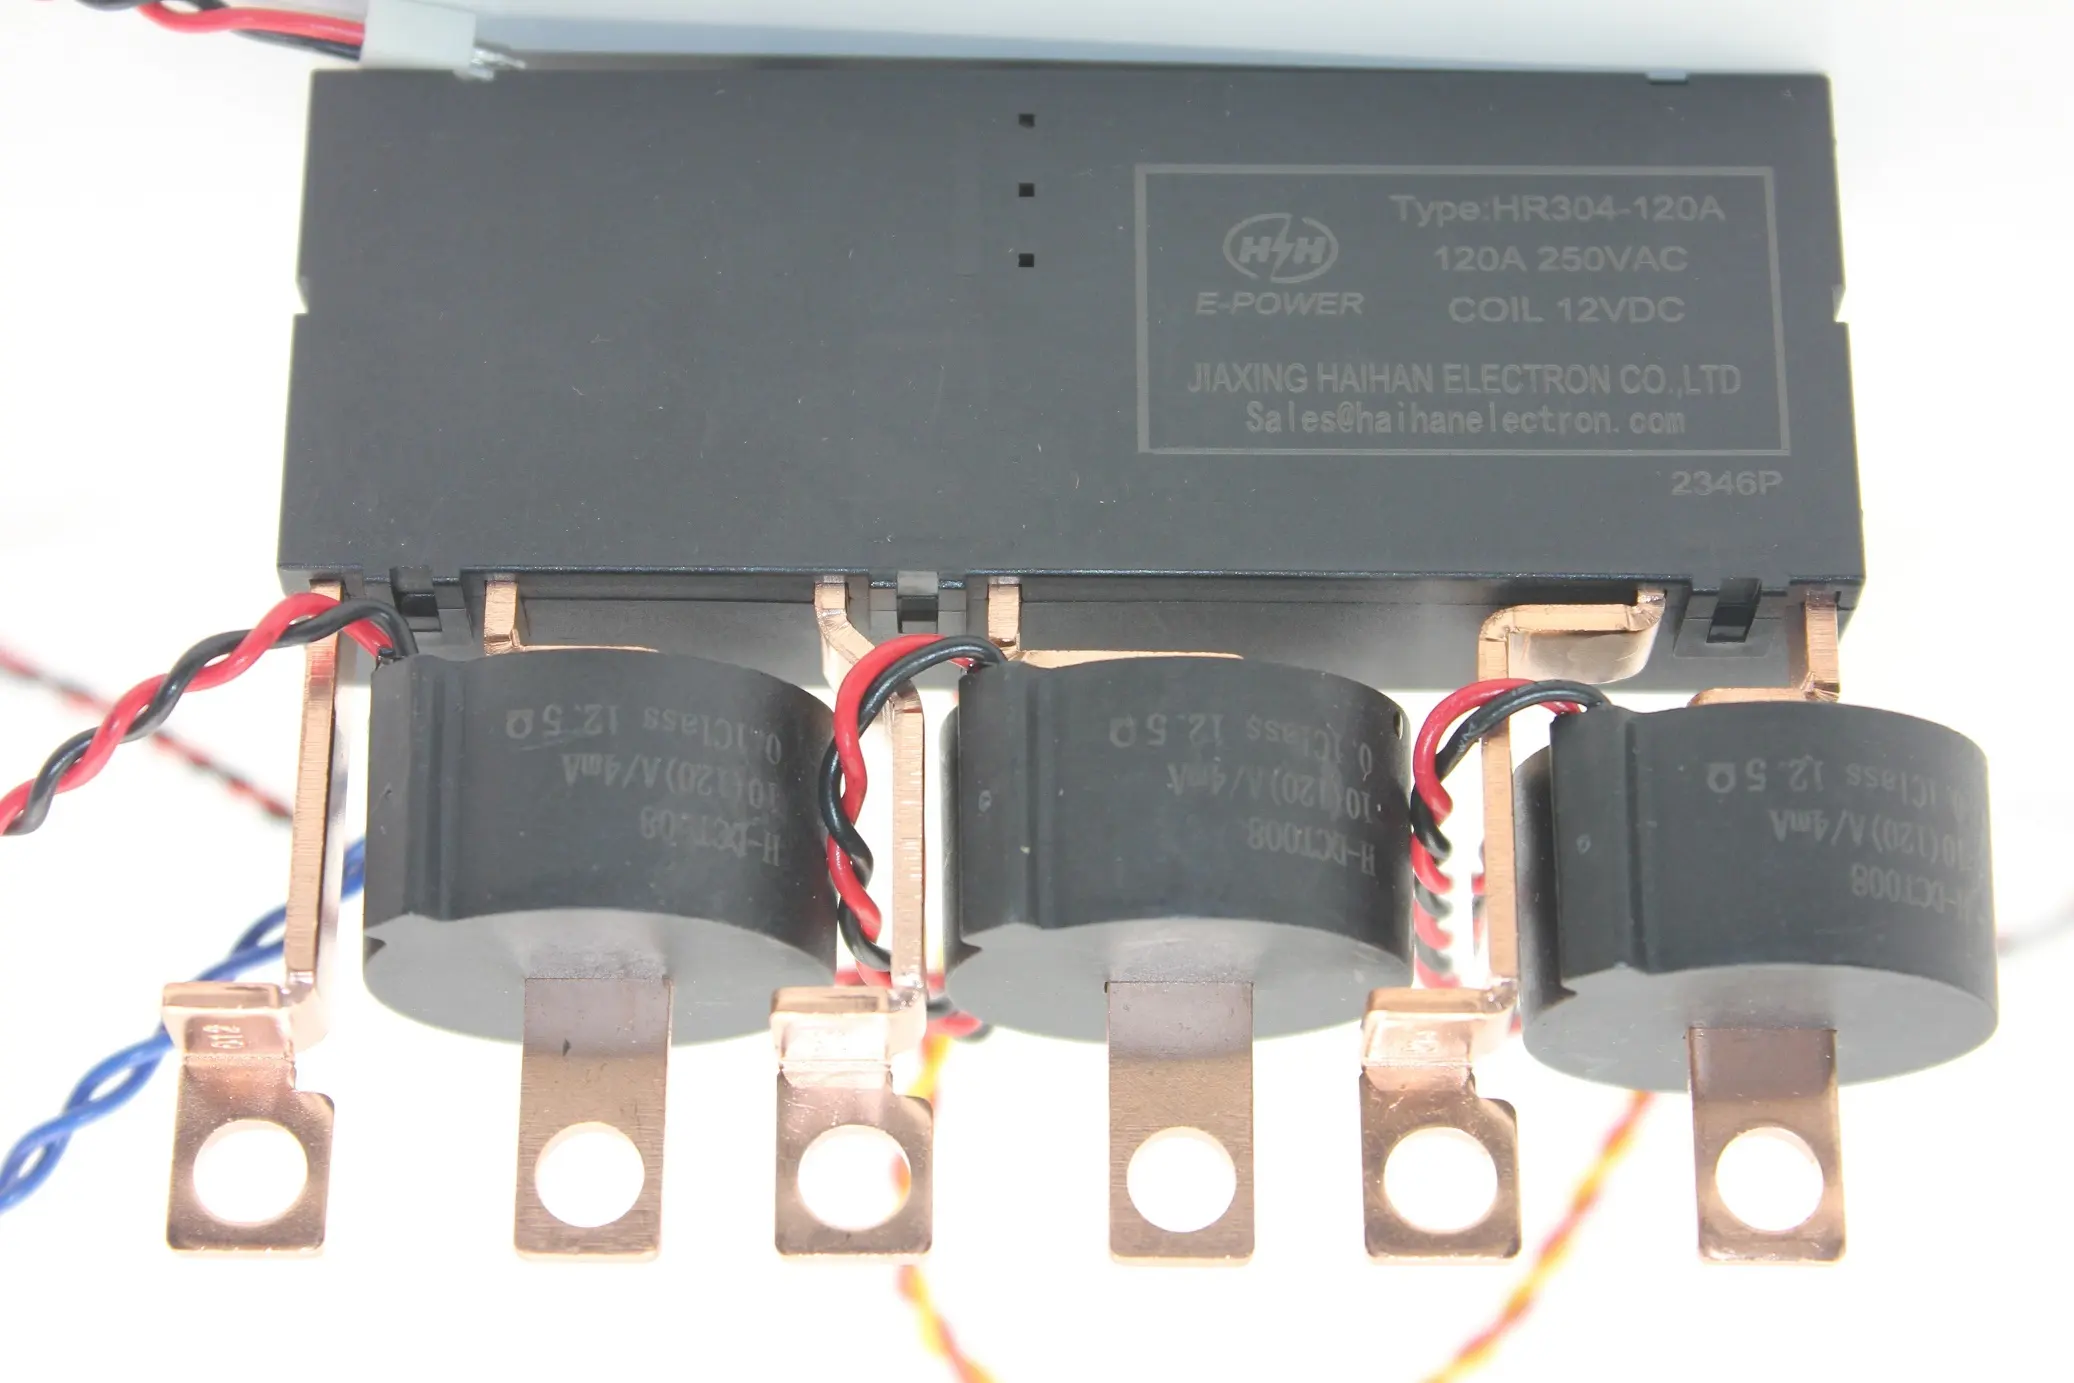 Latching Relay With 120A Single Coil 12VDC And DC CT For 3 Phase Electronics Meter